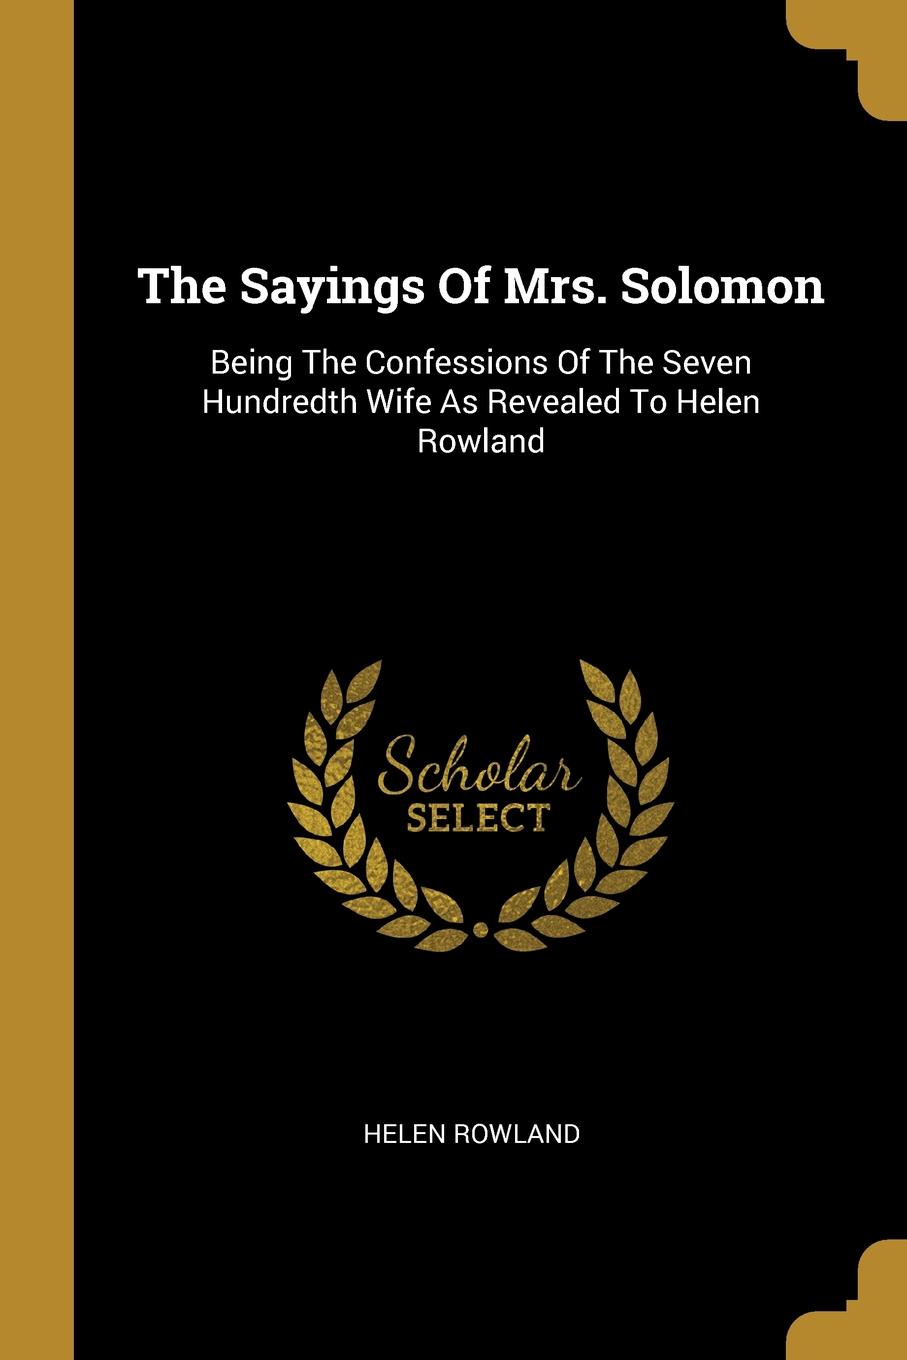 The Sayings Of Mrs. Solomon. Being The Confessions Of The Seven Hundredth Wife As Revealed To Helen Rowland